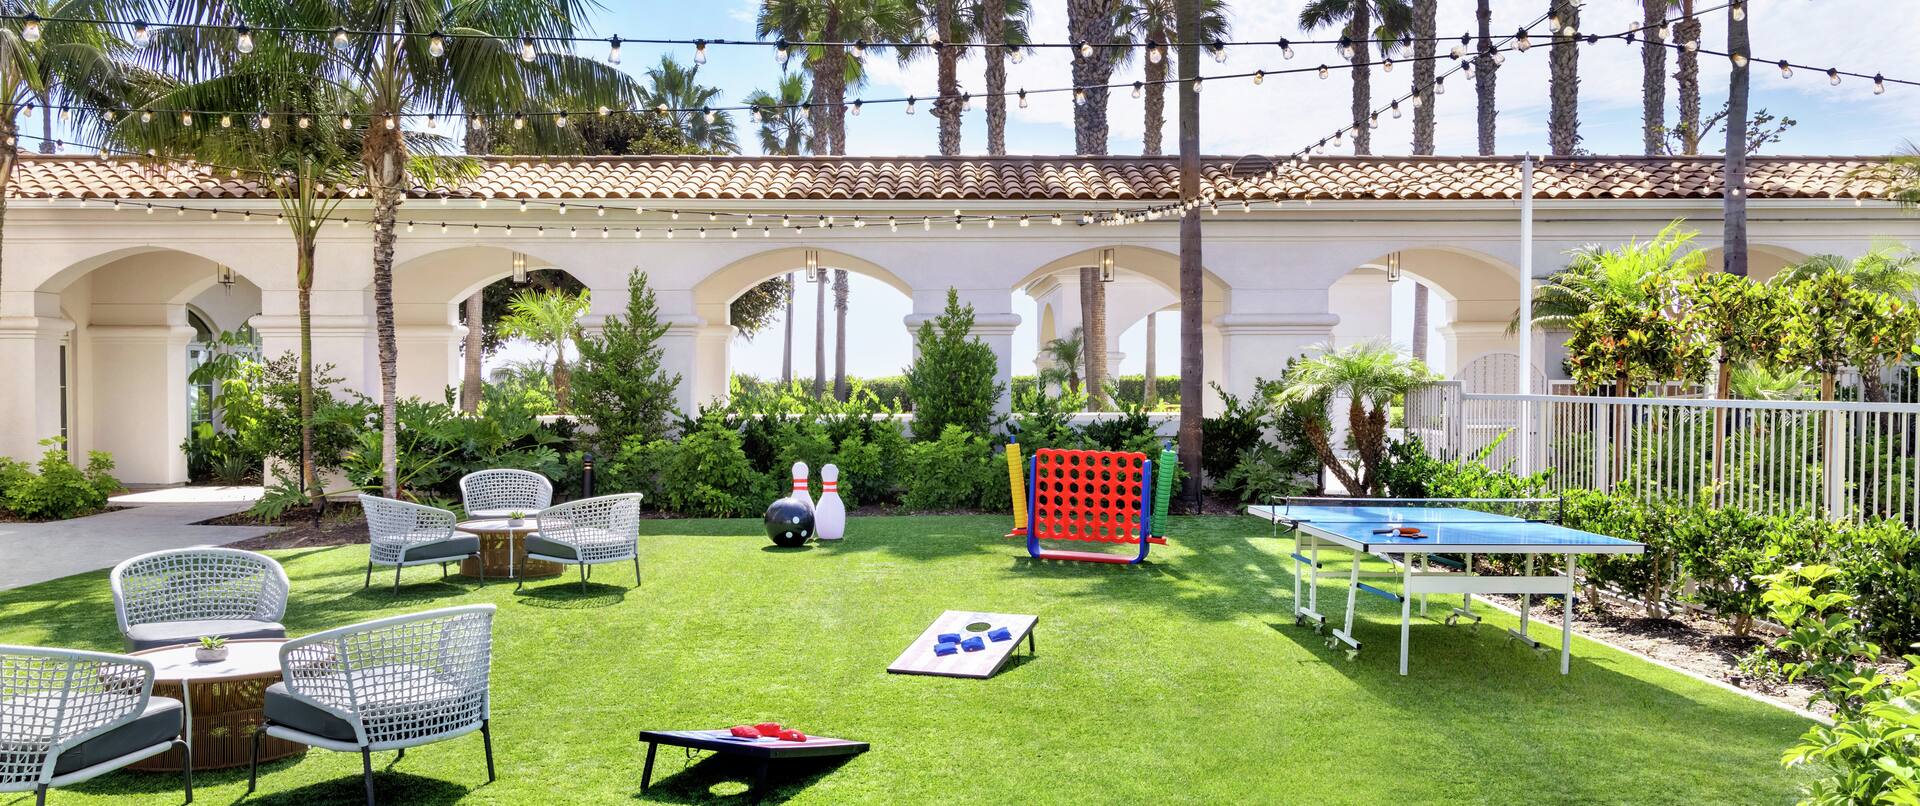 Spacious outdoor patio area for guests to relax and play fun lawn games.